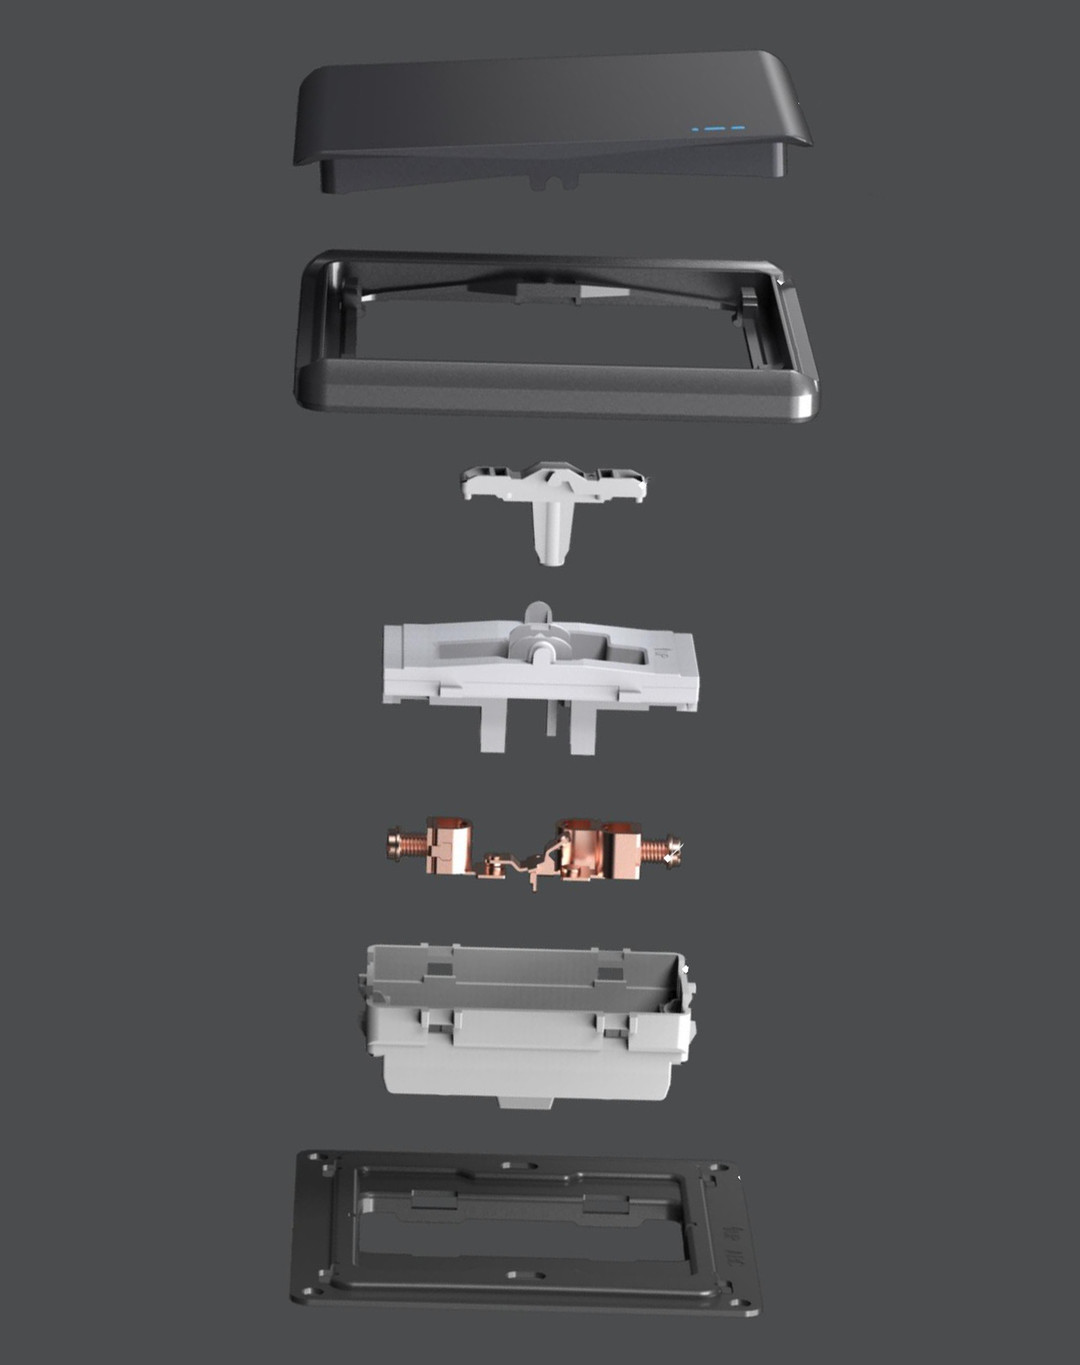 British standard switch exploded view